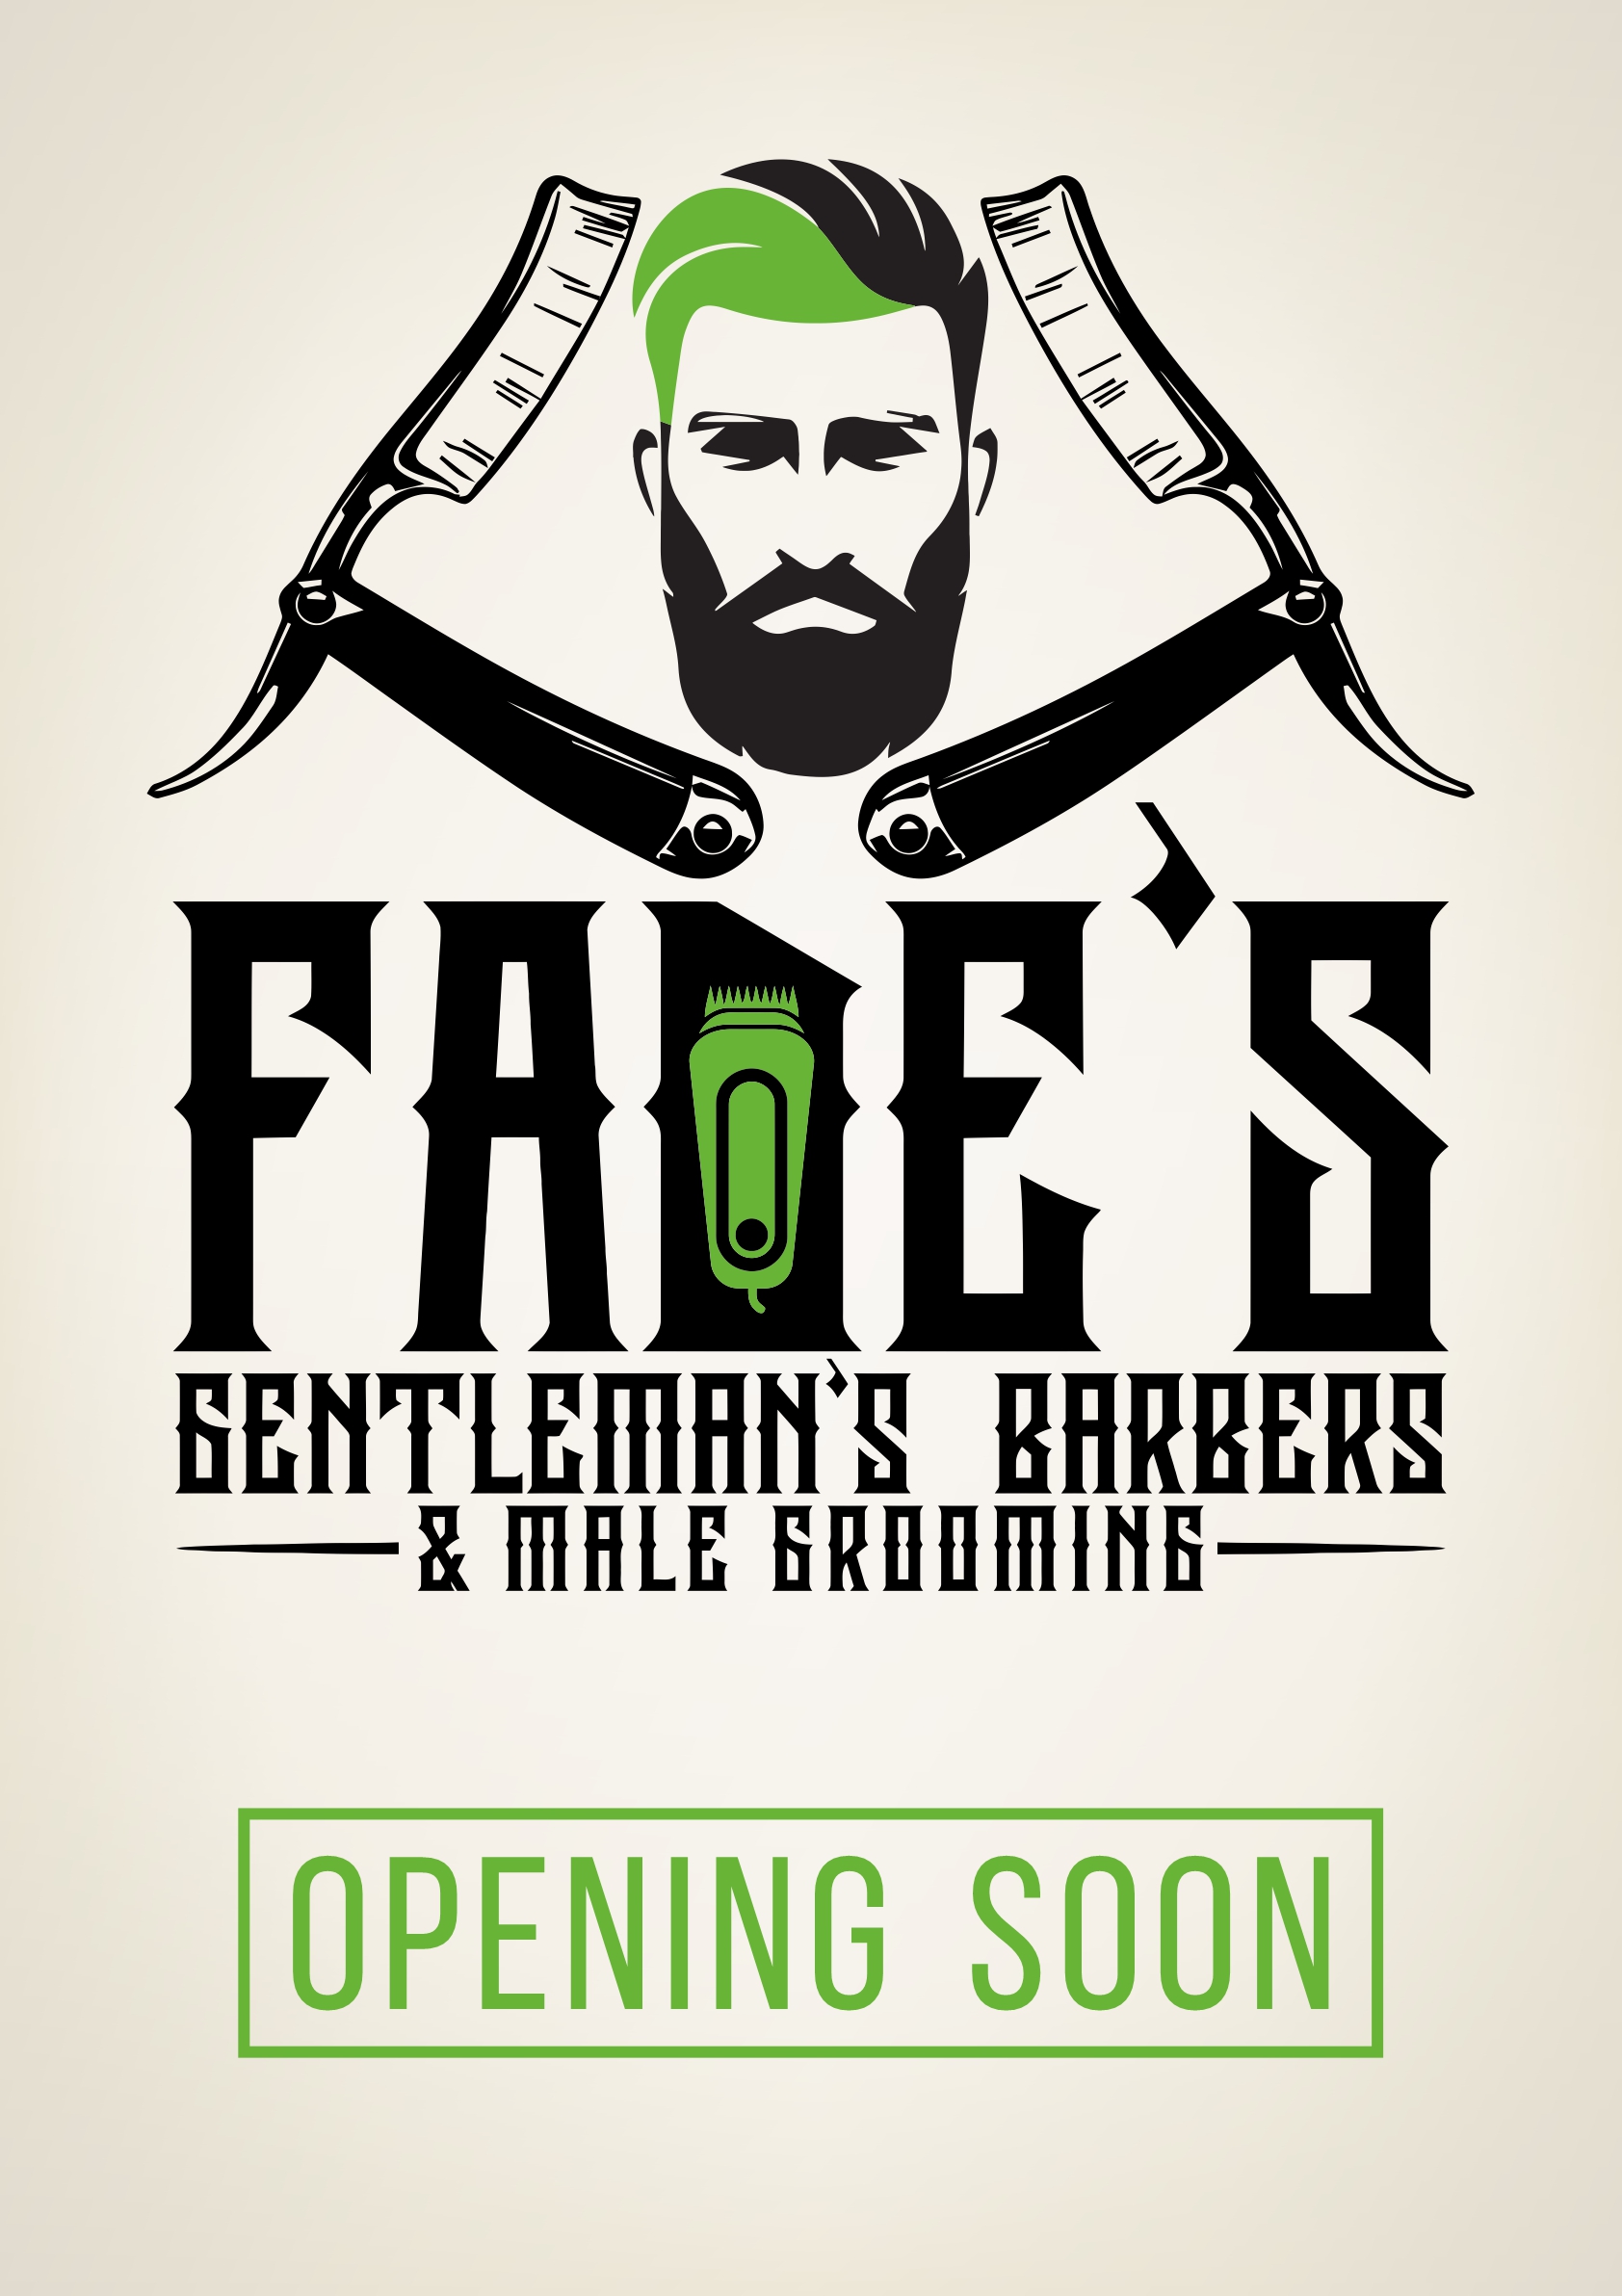 New Barbers opening soon!